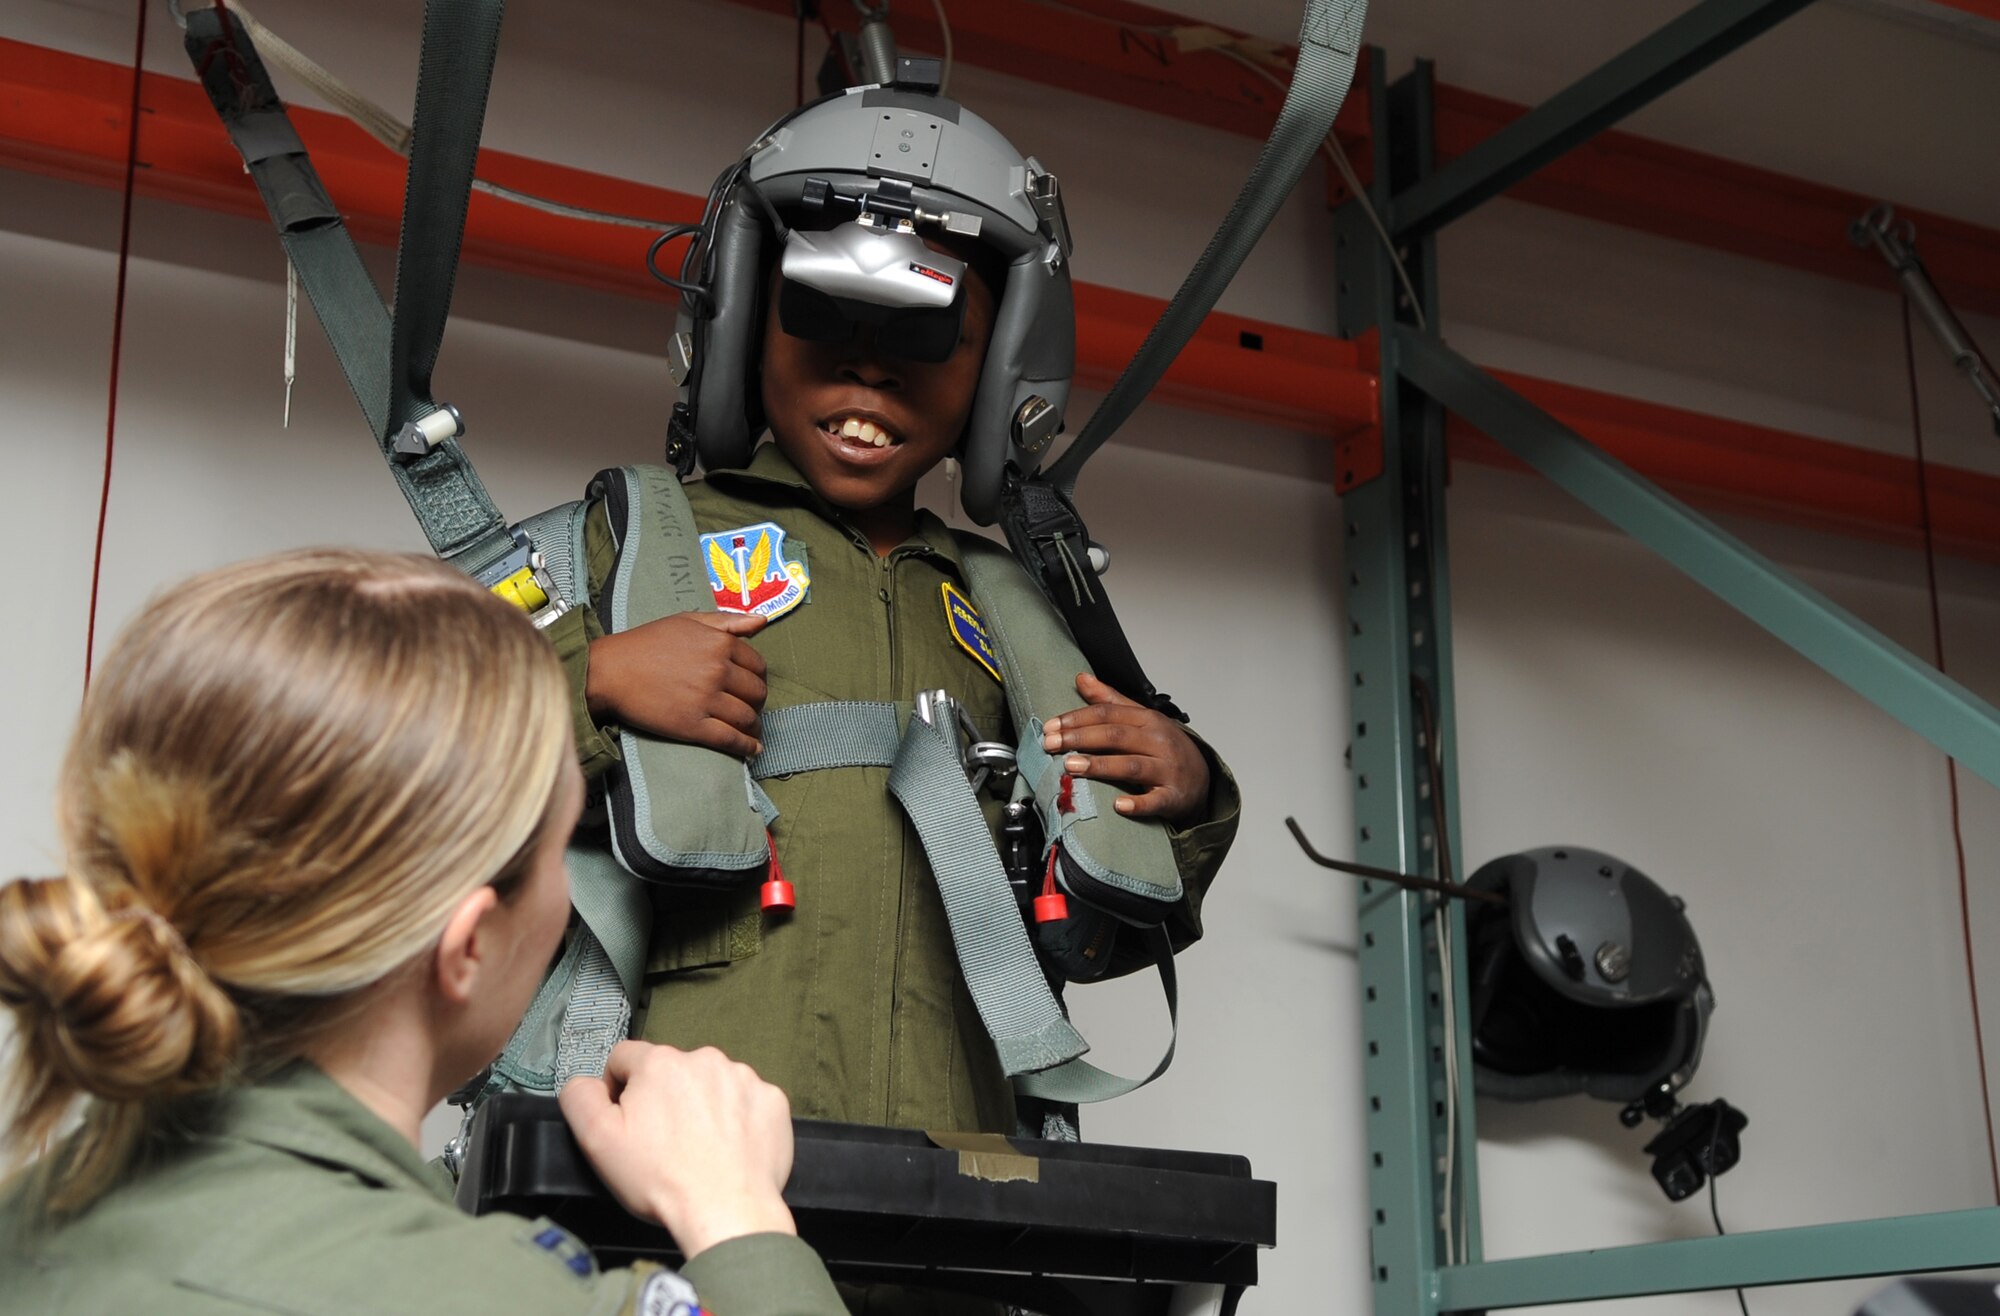 Jeremiah Seaberry, 334th Fighter Squadron pilot for a day, looks to Capt. Kat Frost, PFAD project officer, for help during egress training as part of a 4th Fighter Wing Pilot for a Day event, April 3, 2015, at Seymour Johnson Air Force Base, North Carolina. “Swoosh,” as he was addressed throughout the day, experienced egressing from an aircraft via parachute through virtual reality. (U.S. Air Force photo/Senior Airman Ashley J. Thum)